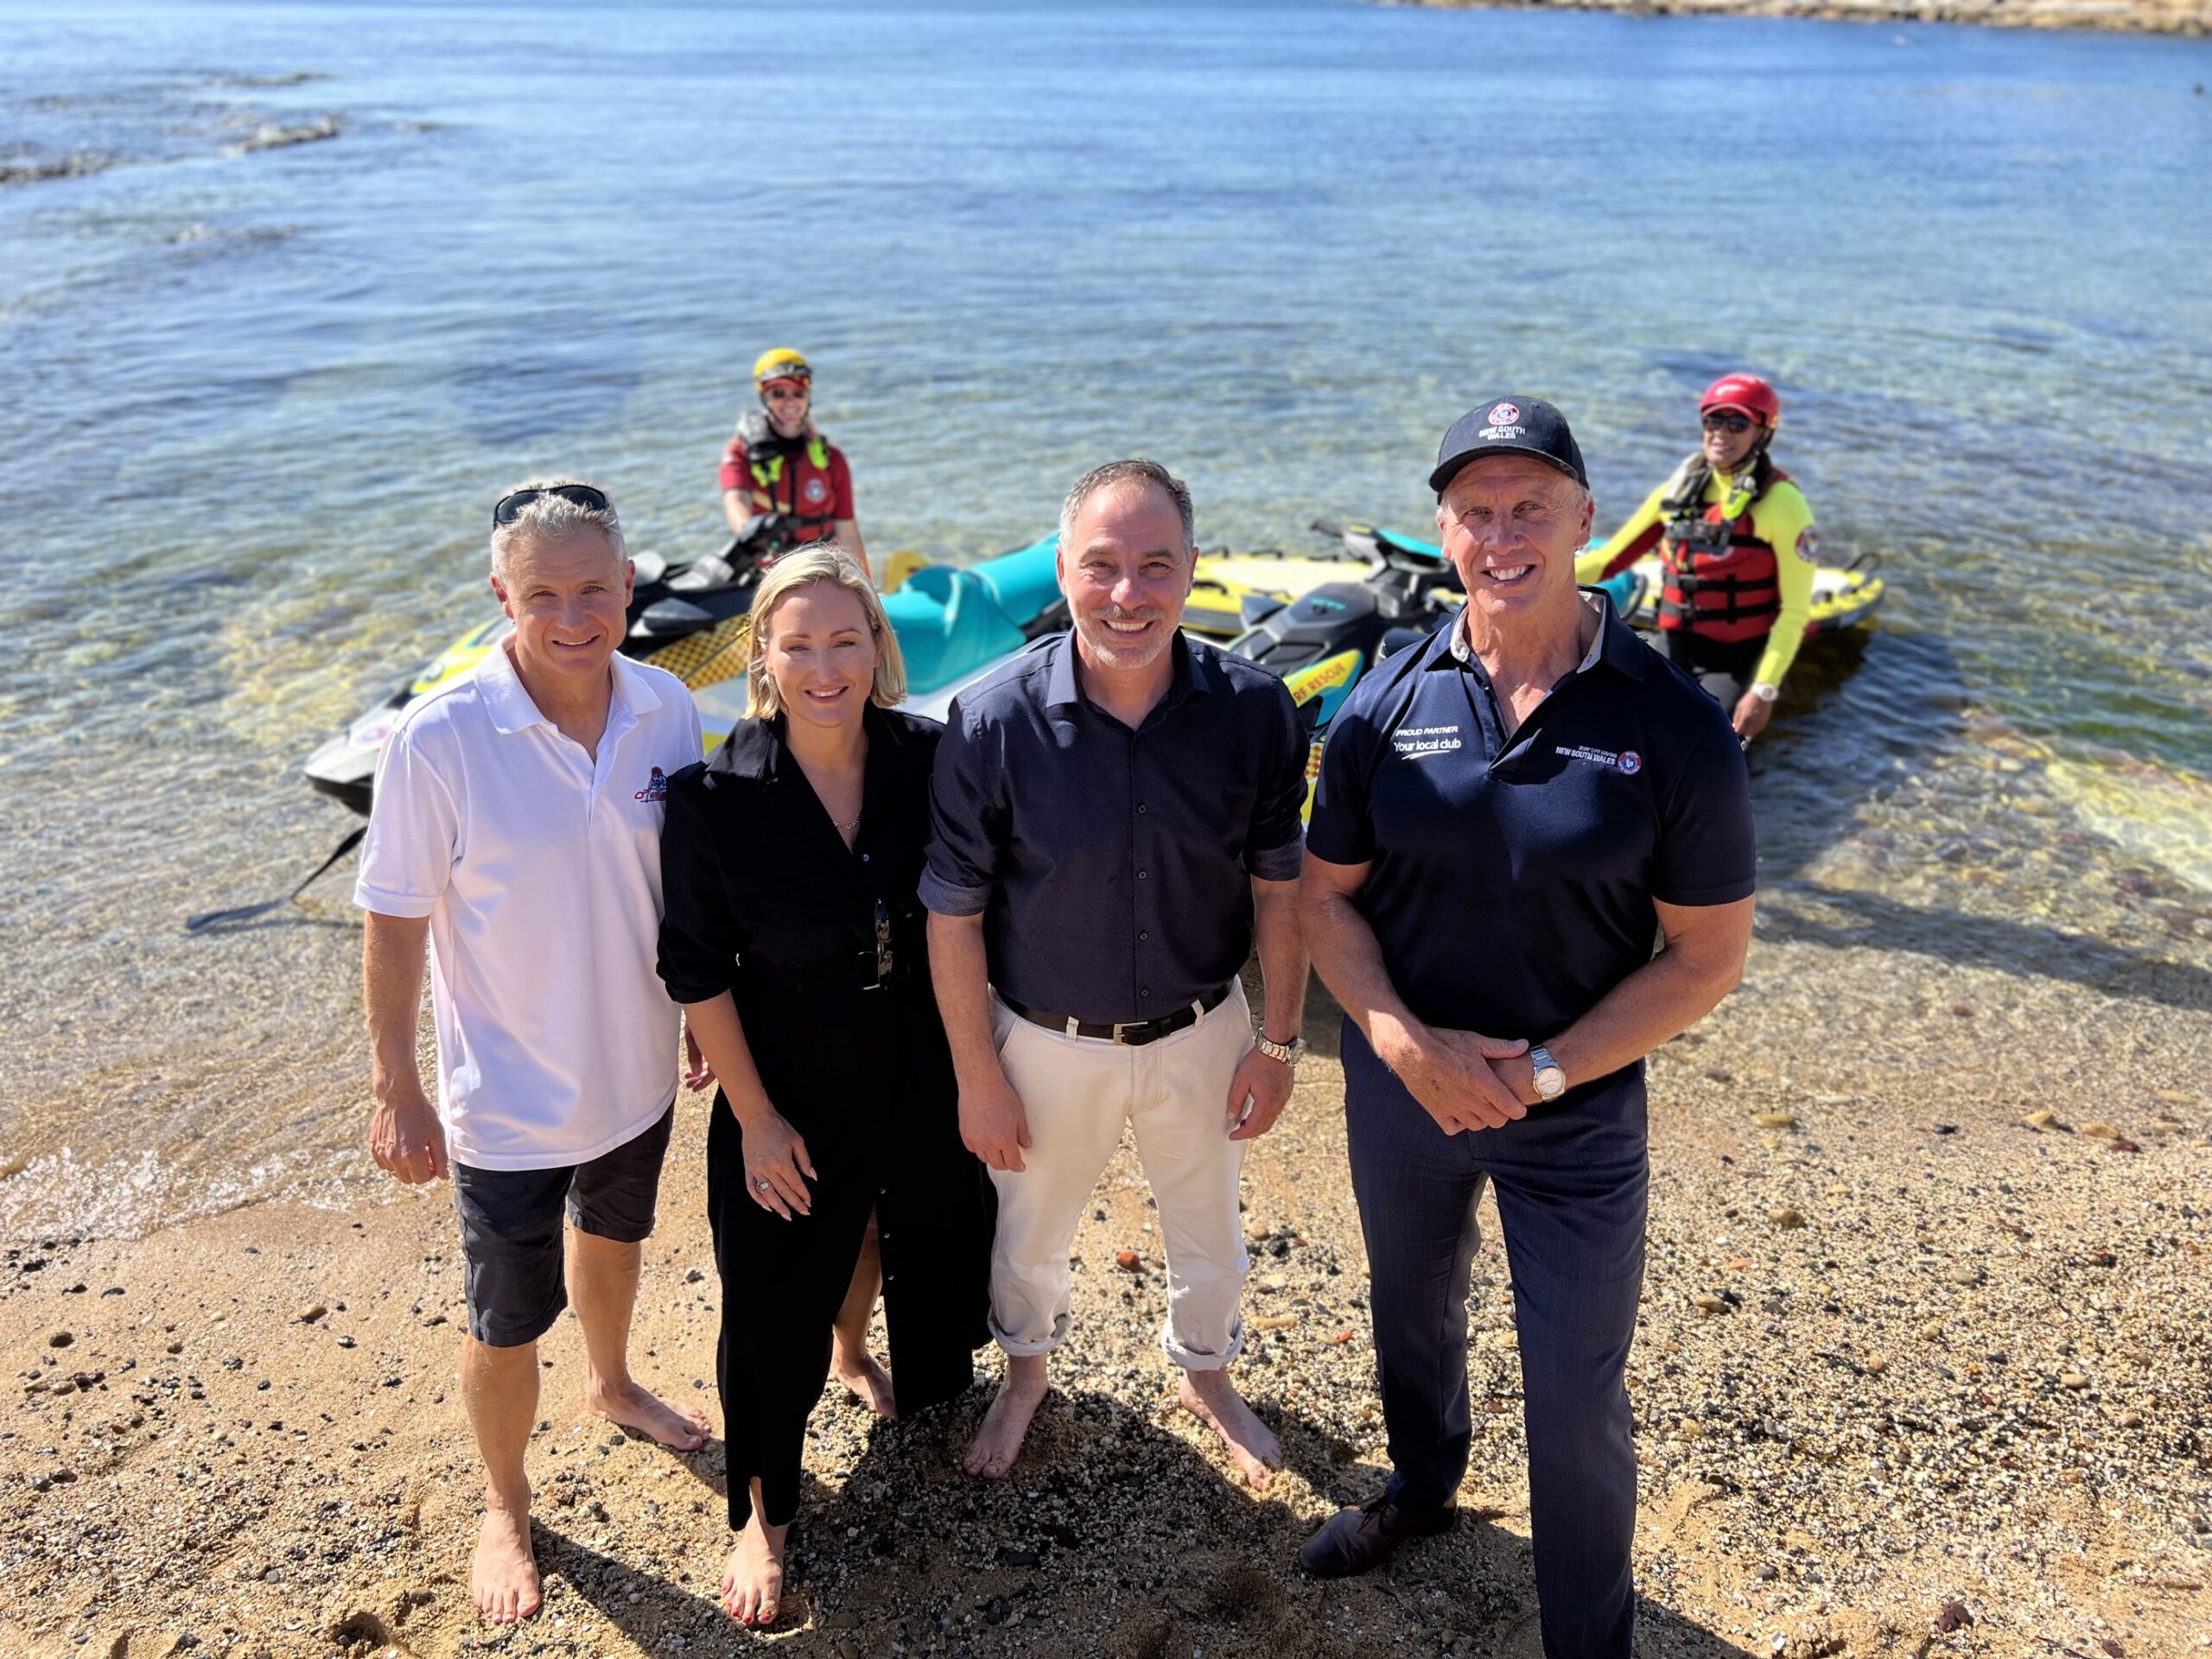 Minister for Emergency Services Jihad Dib2, Member for Coogee Dr Marjorie O’Neill, Federal Member for Kingsford Smith Matt Thistlethwaite and SLSNSW CEO Steve Pearce standing in front of two jetskis, operated by two female drivers.